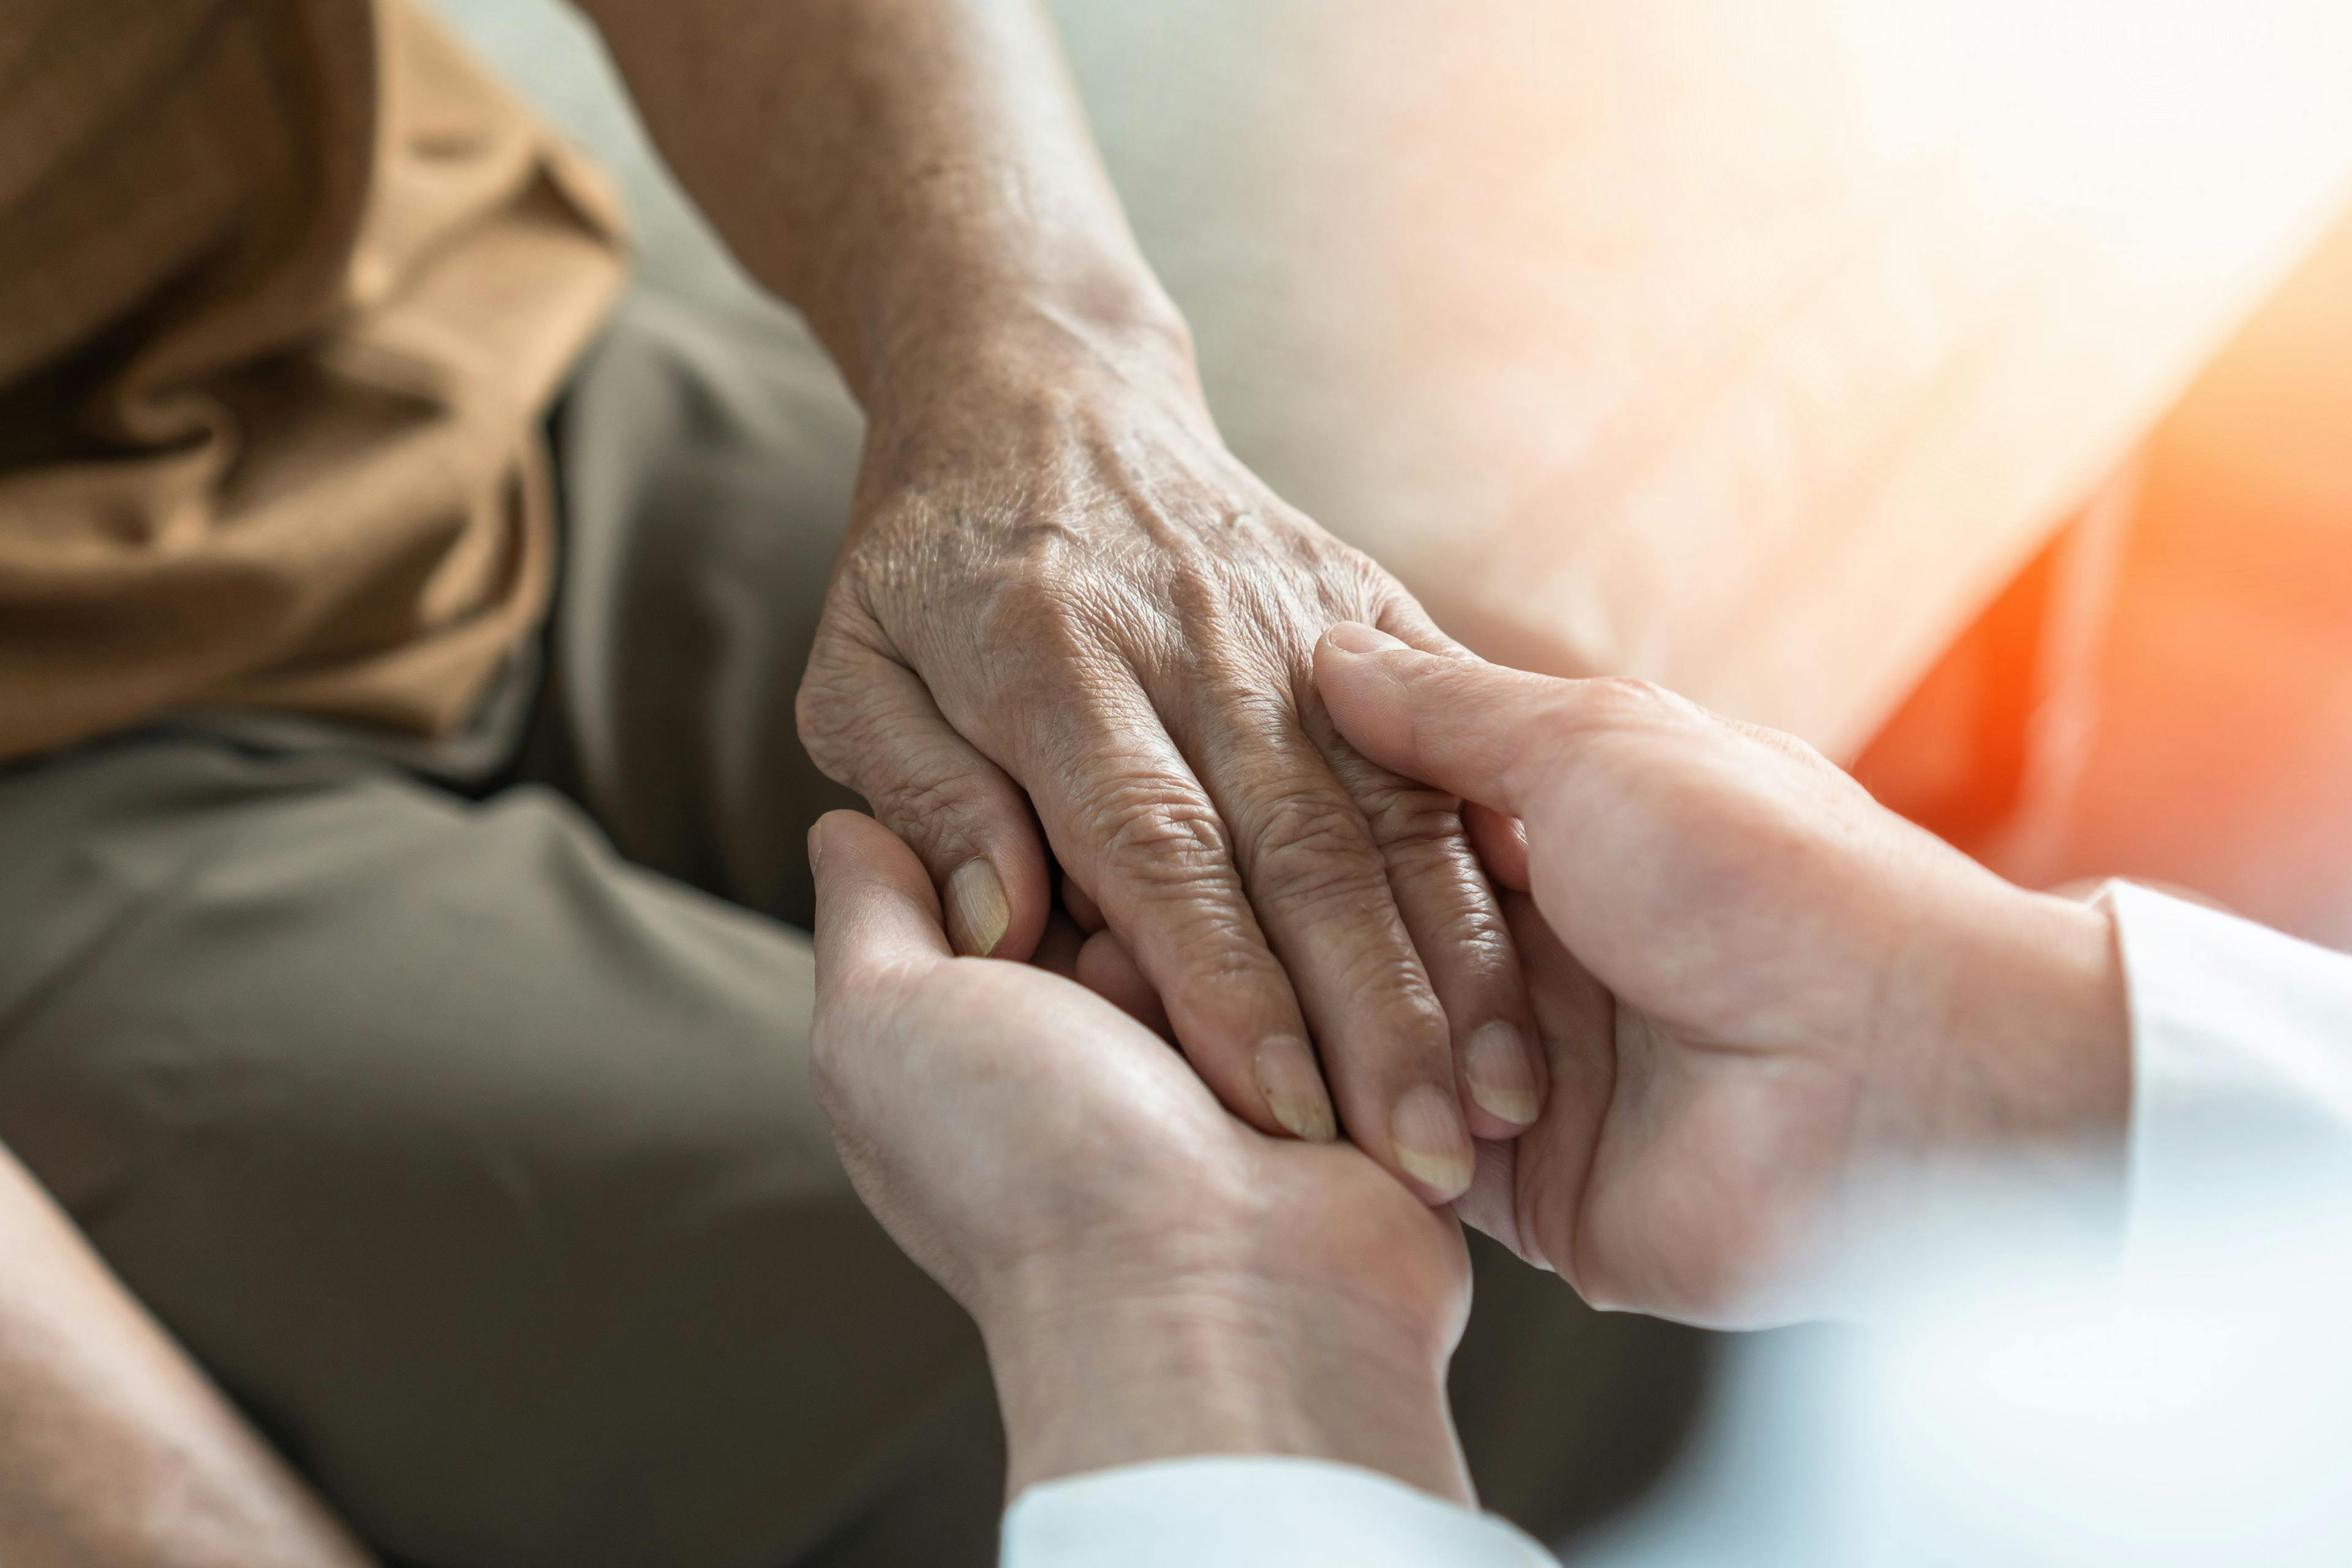 Health care worker holding the hand of an elderly patient